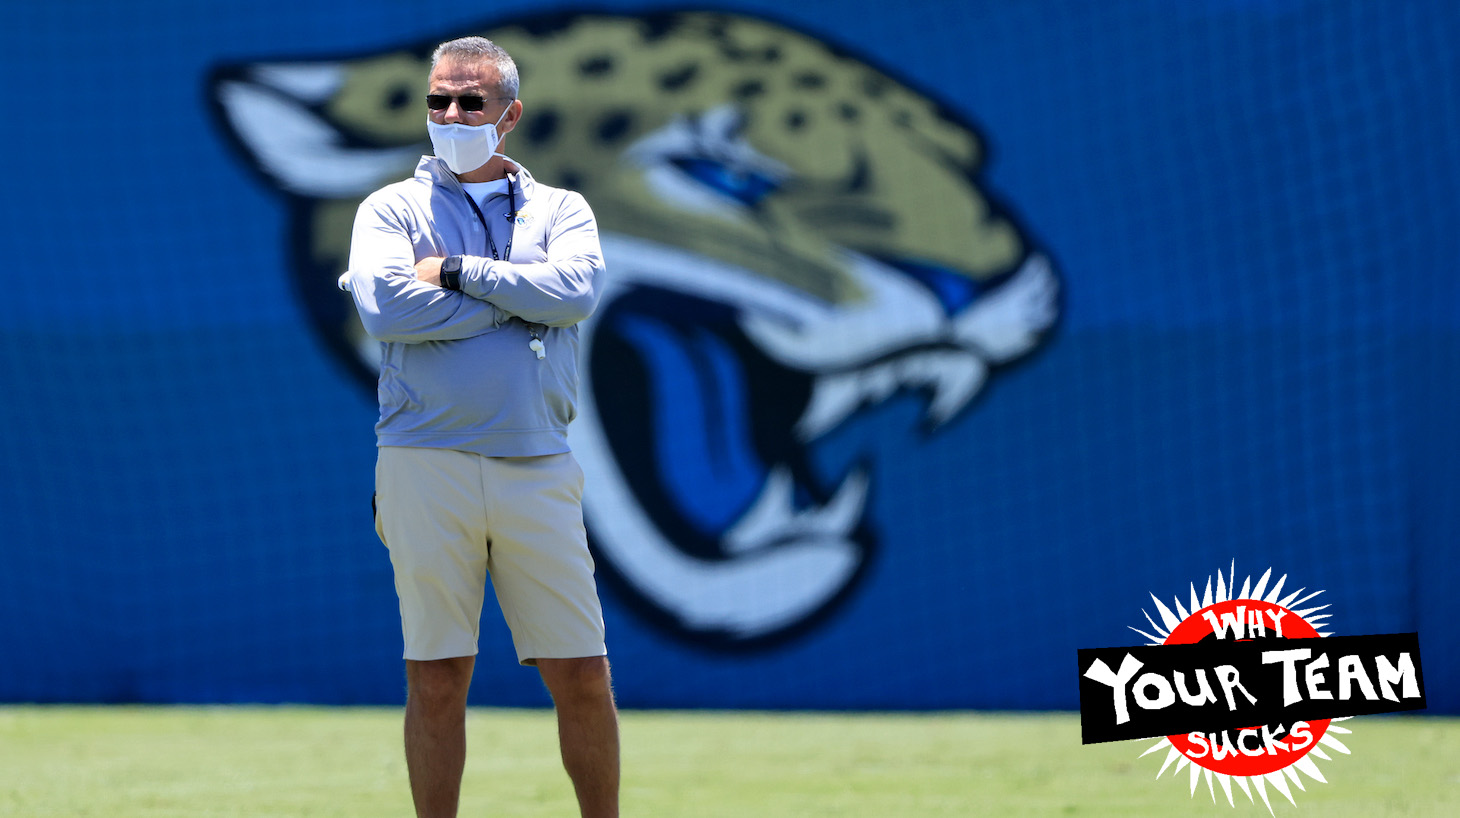 JACKSONVILLE, FLORIDA - MAY 15: Head coach of the Jacksonville Jaguars Urban Meyer watches the action during Jacksonville Jaguars Training Camp at TIAA Bank Field on May 15, 2021 in Jacksonville, Florida. (Photo by Sam Greenwood/Getty Images)